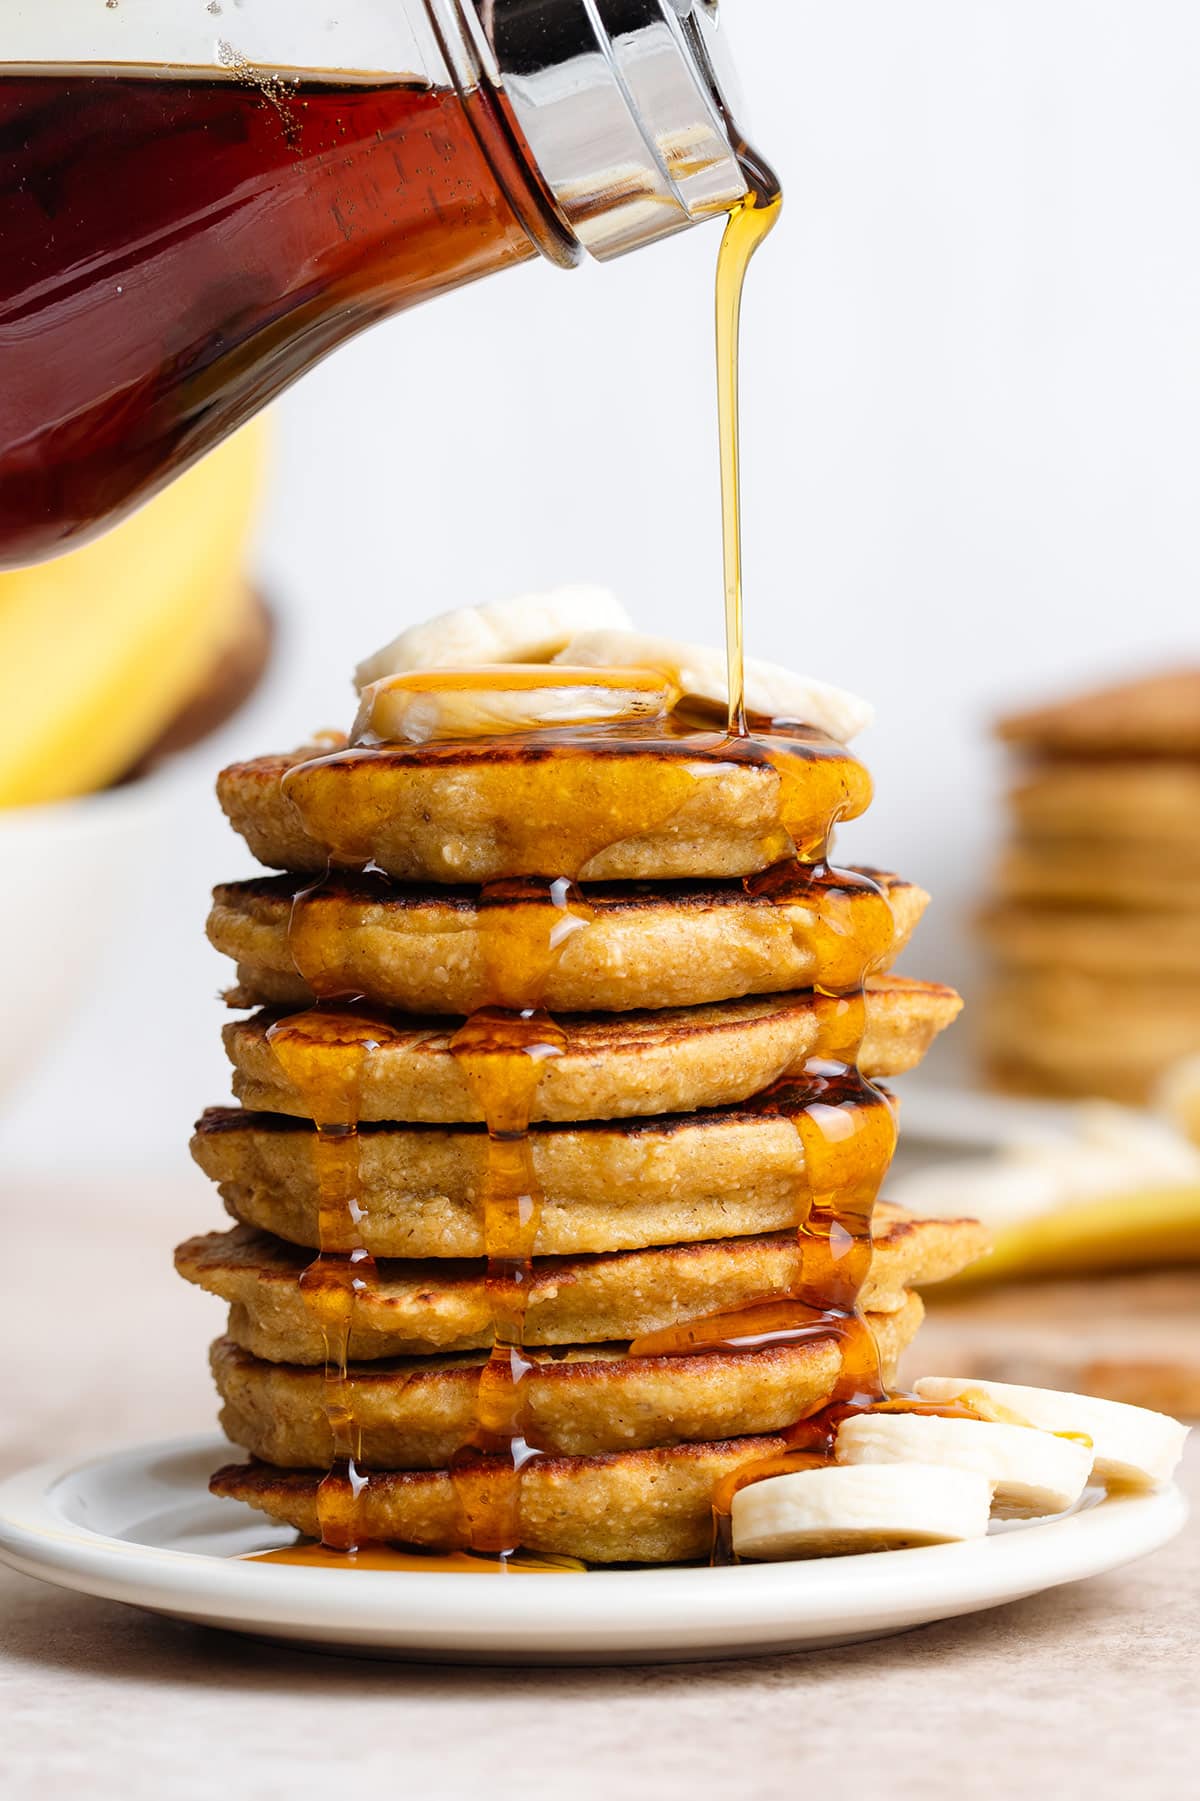 Maple syrup being poured over a stack of pancakes with banana slices on top.